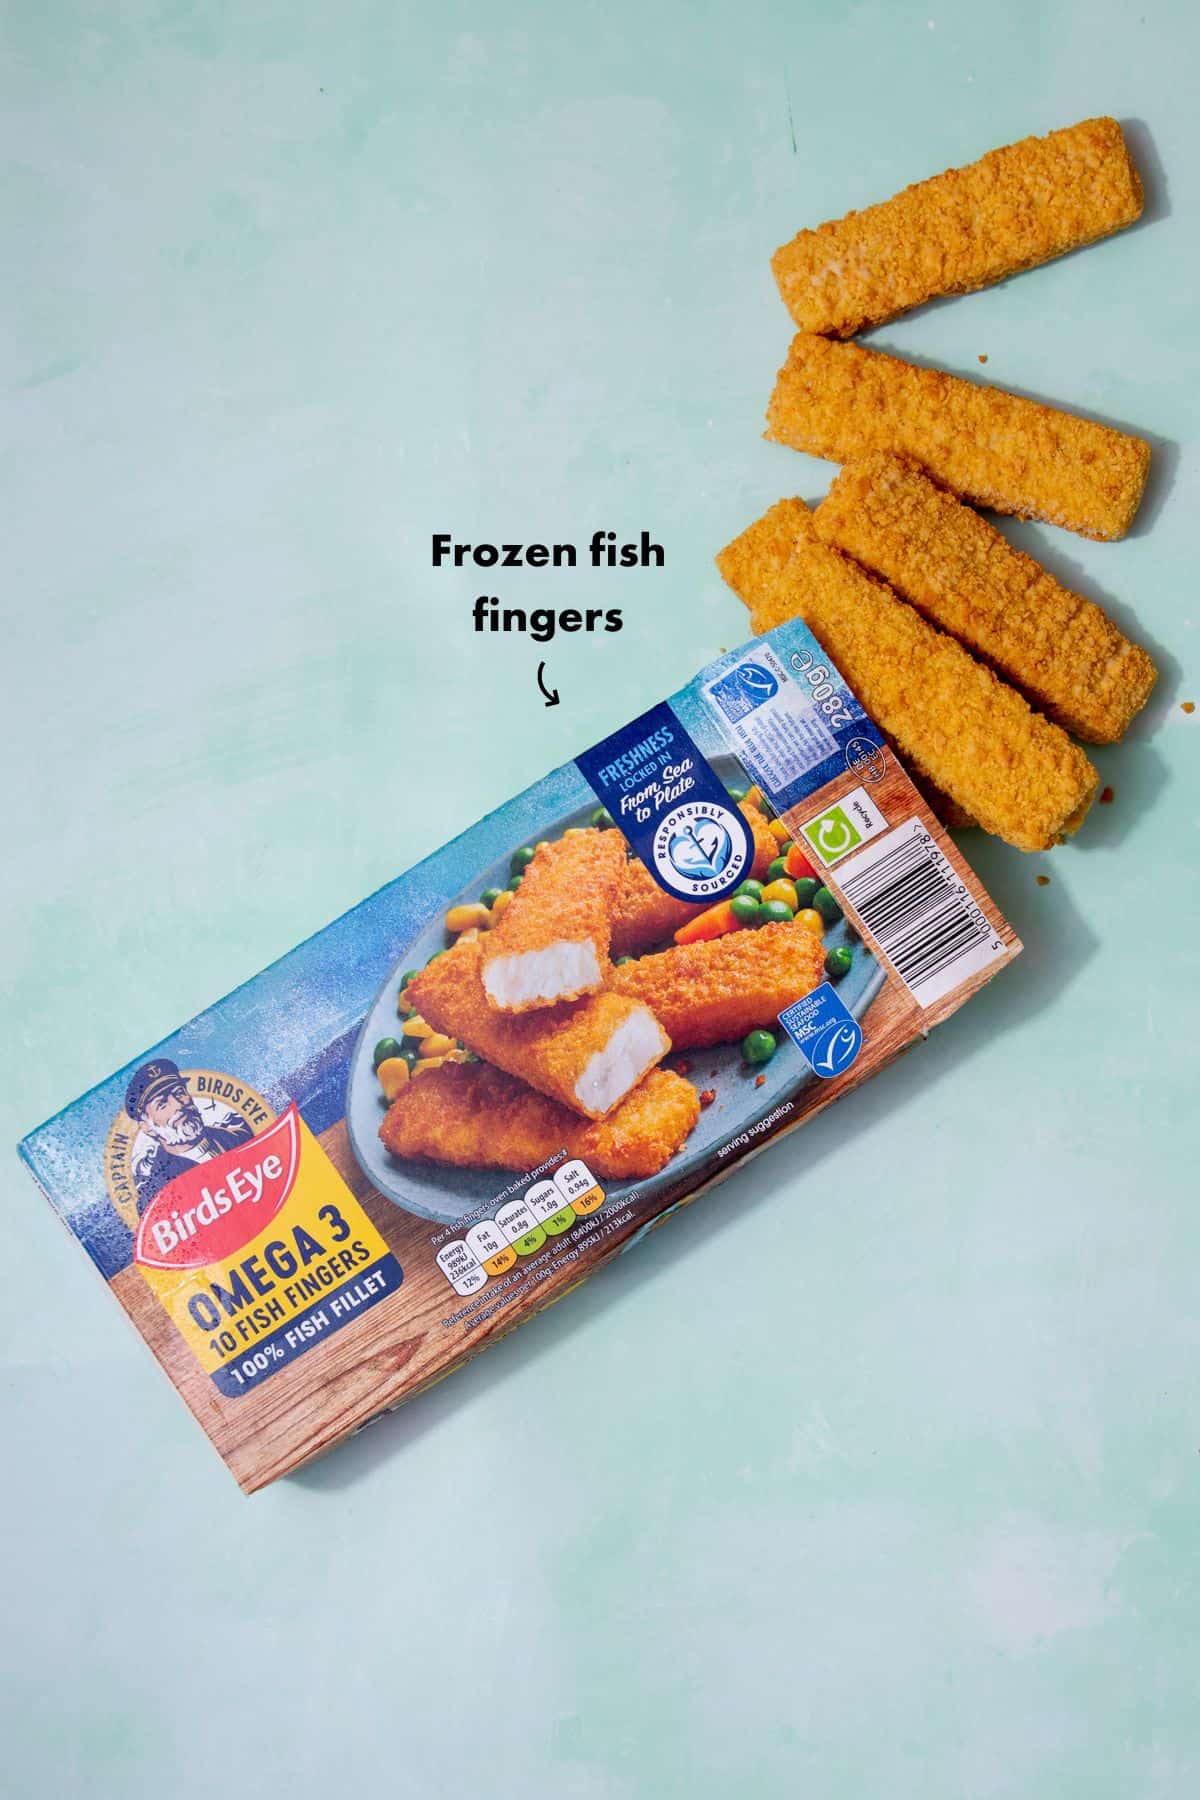 A alarge pack oof Bird'sEye Omega 3 10 fish fingers, with 4 fish fingers outside the packaging.